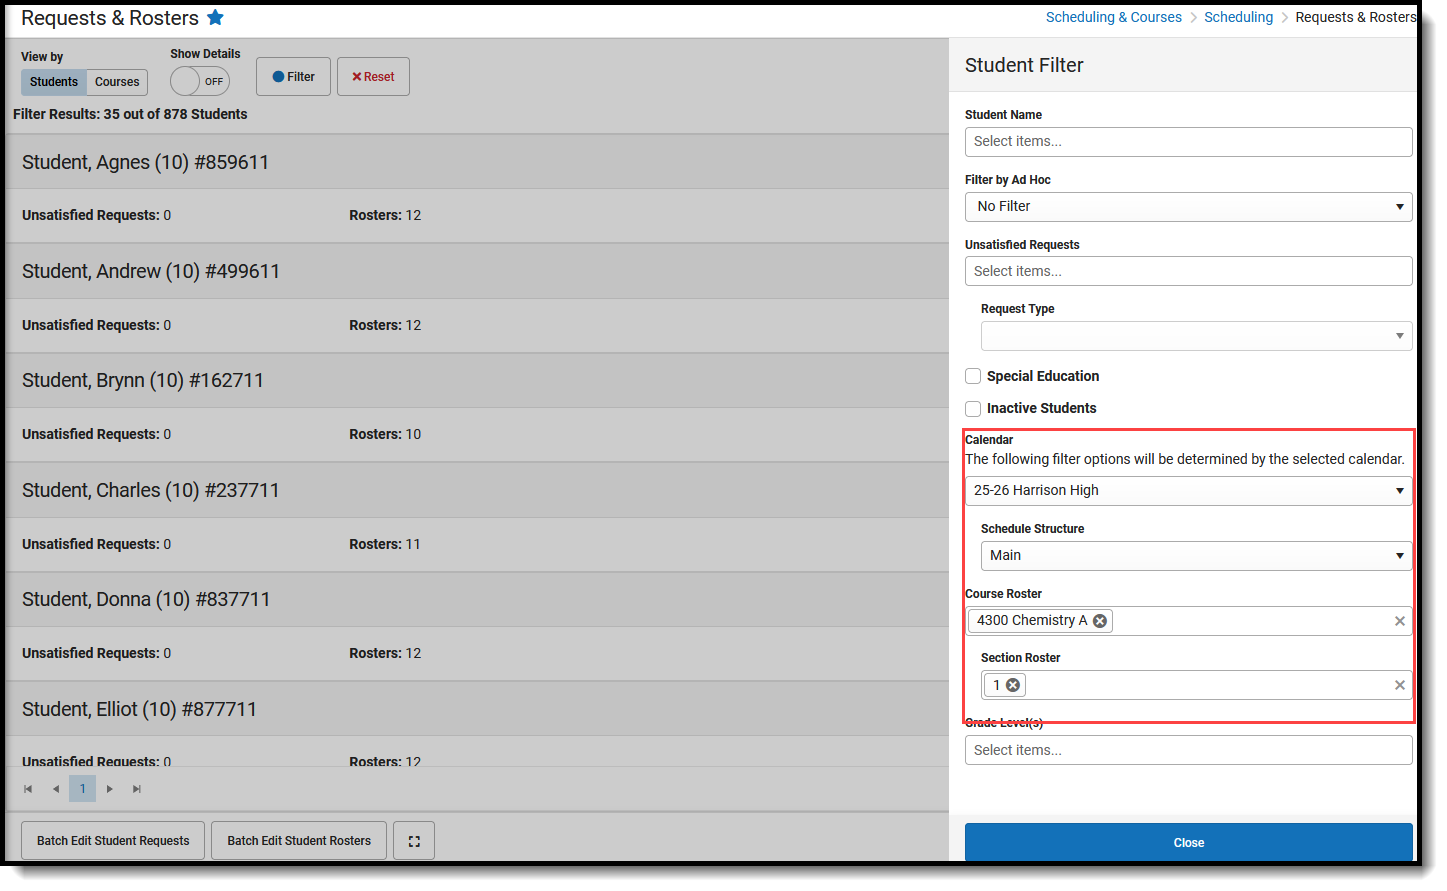 Screenshot of the Student Filter options returning students in a specific course and section. 